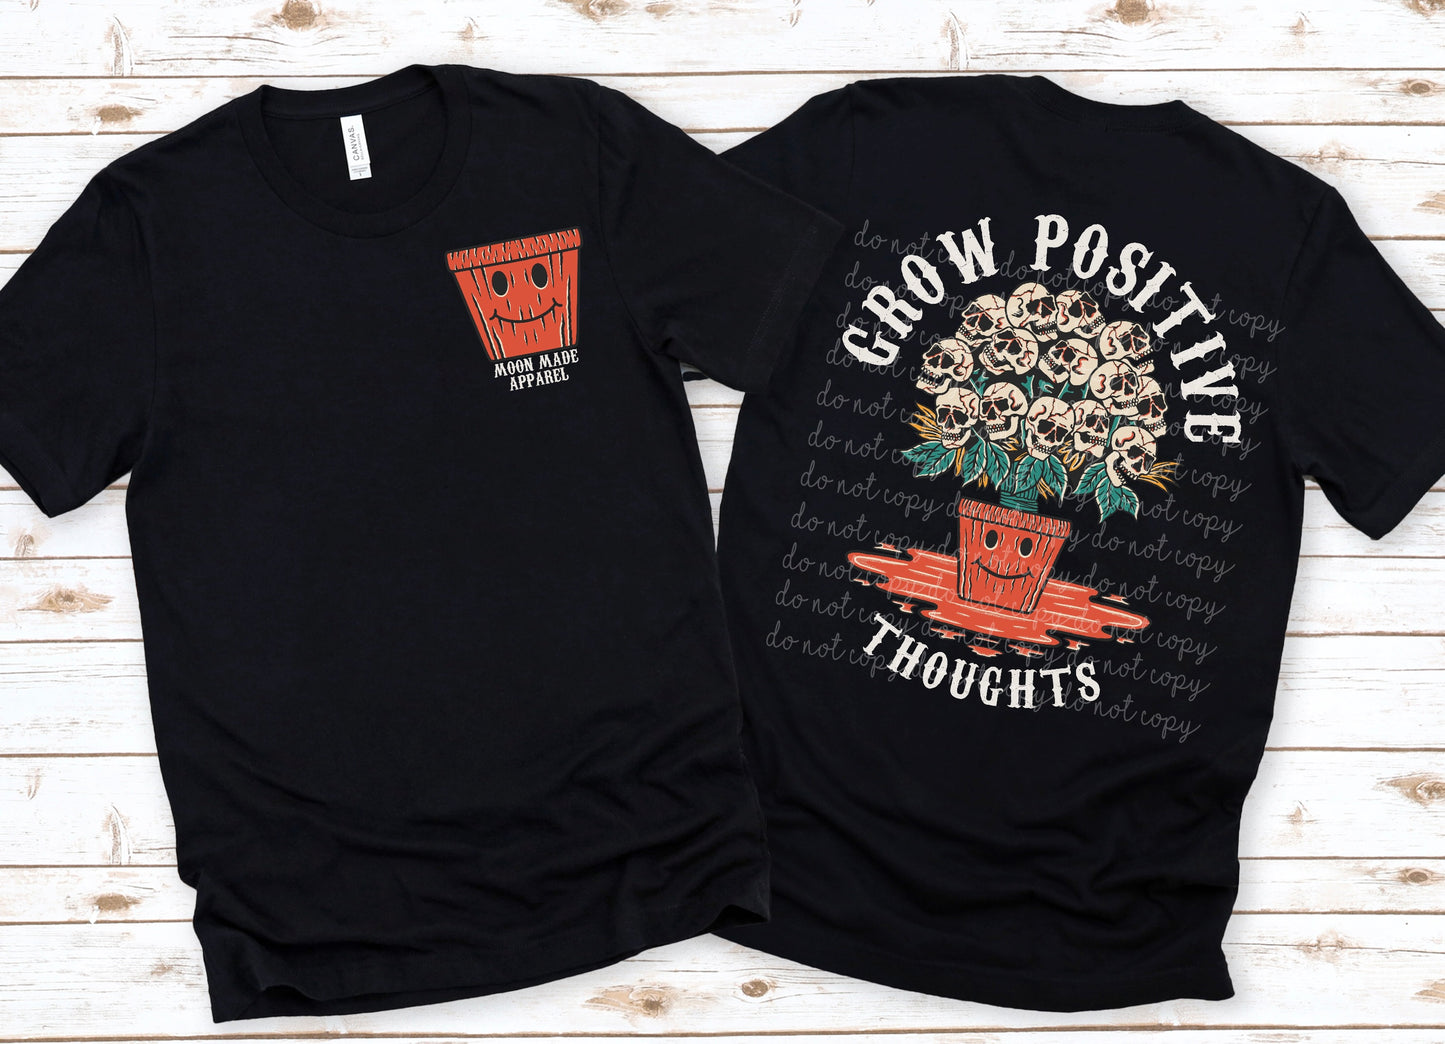 PREORDER Grow positive thoughts- moon made apparel